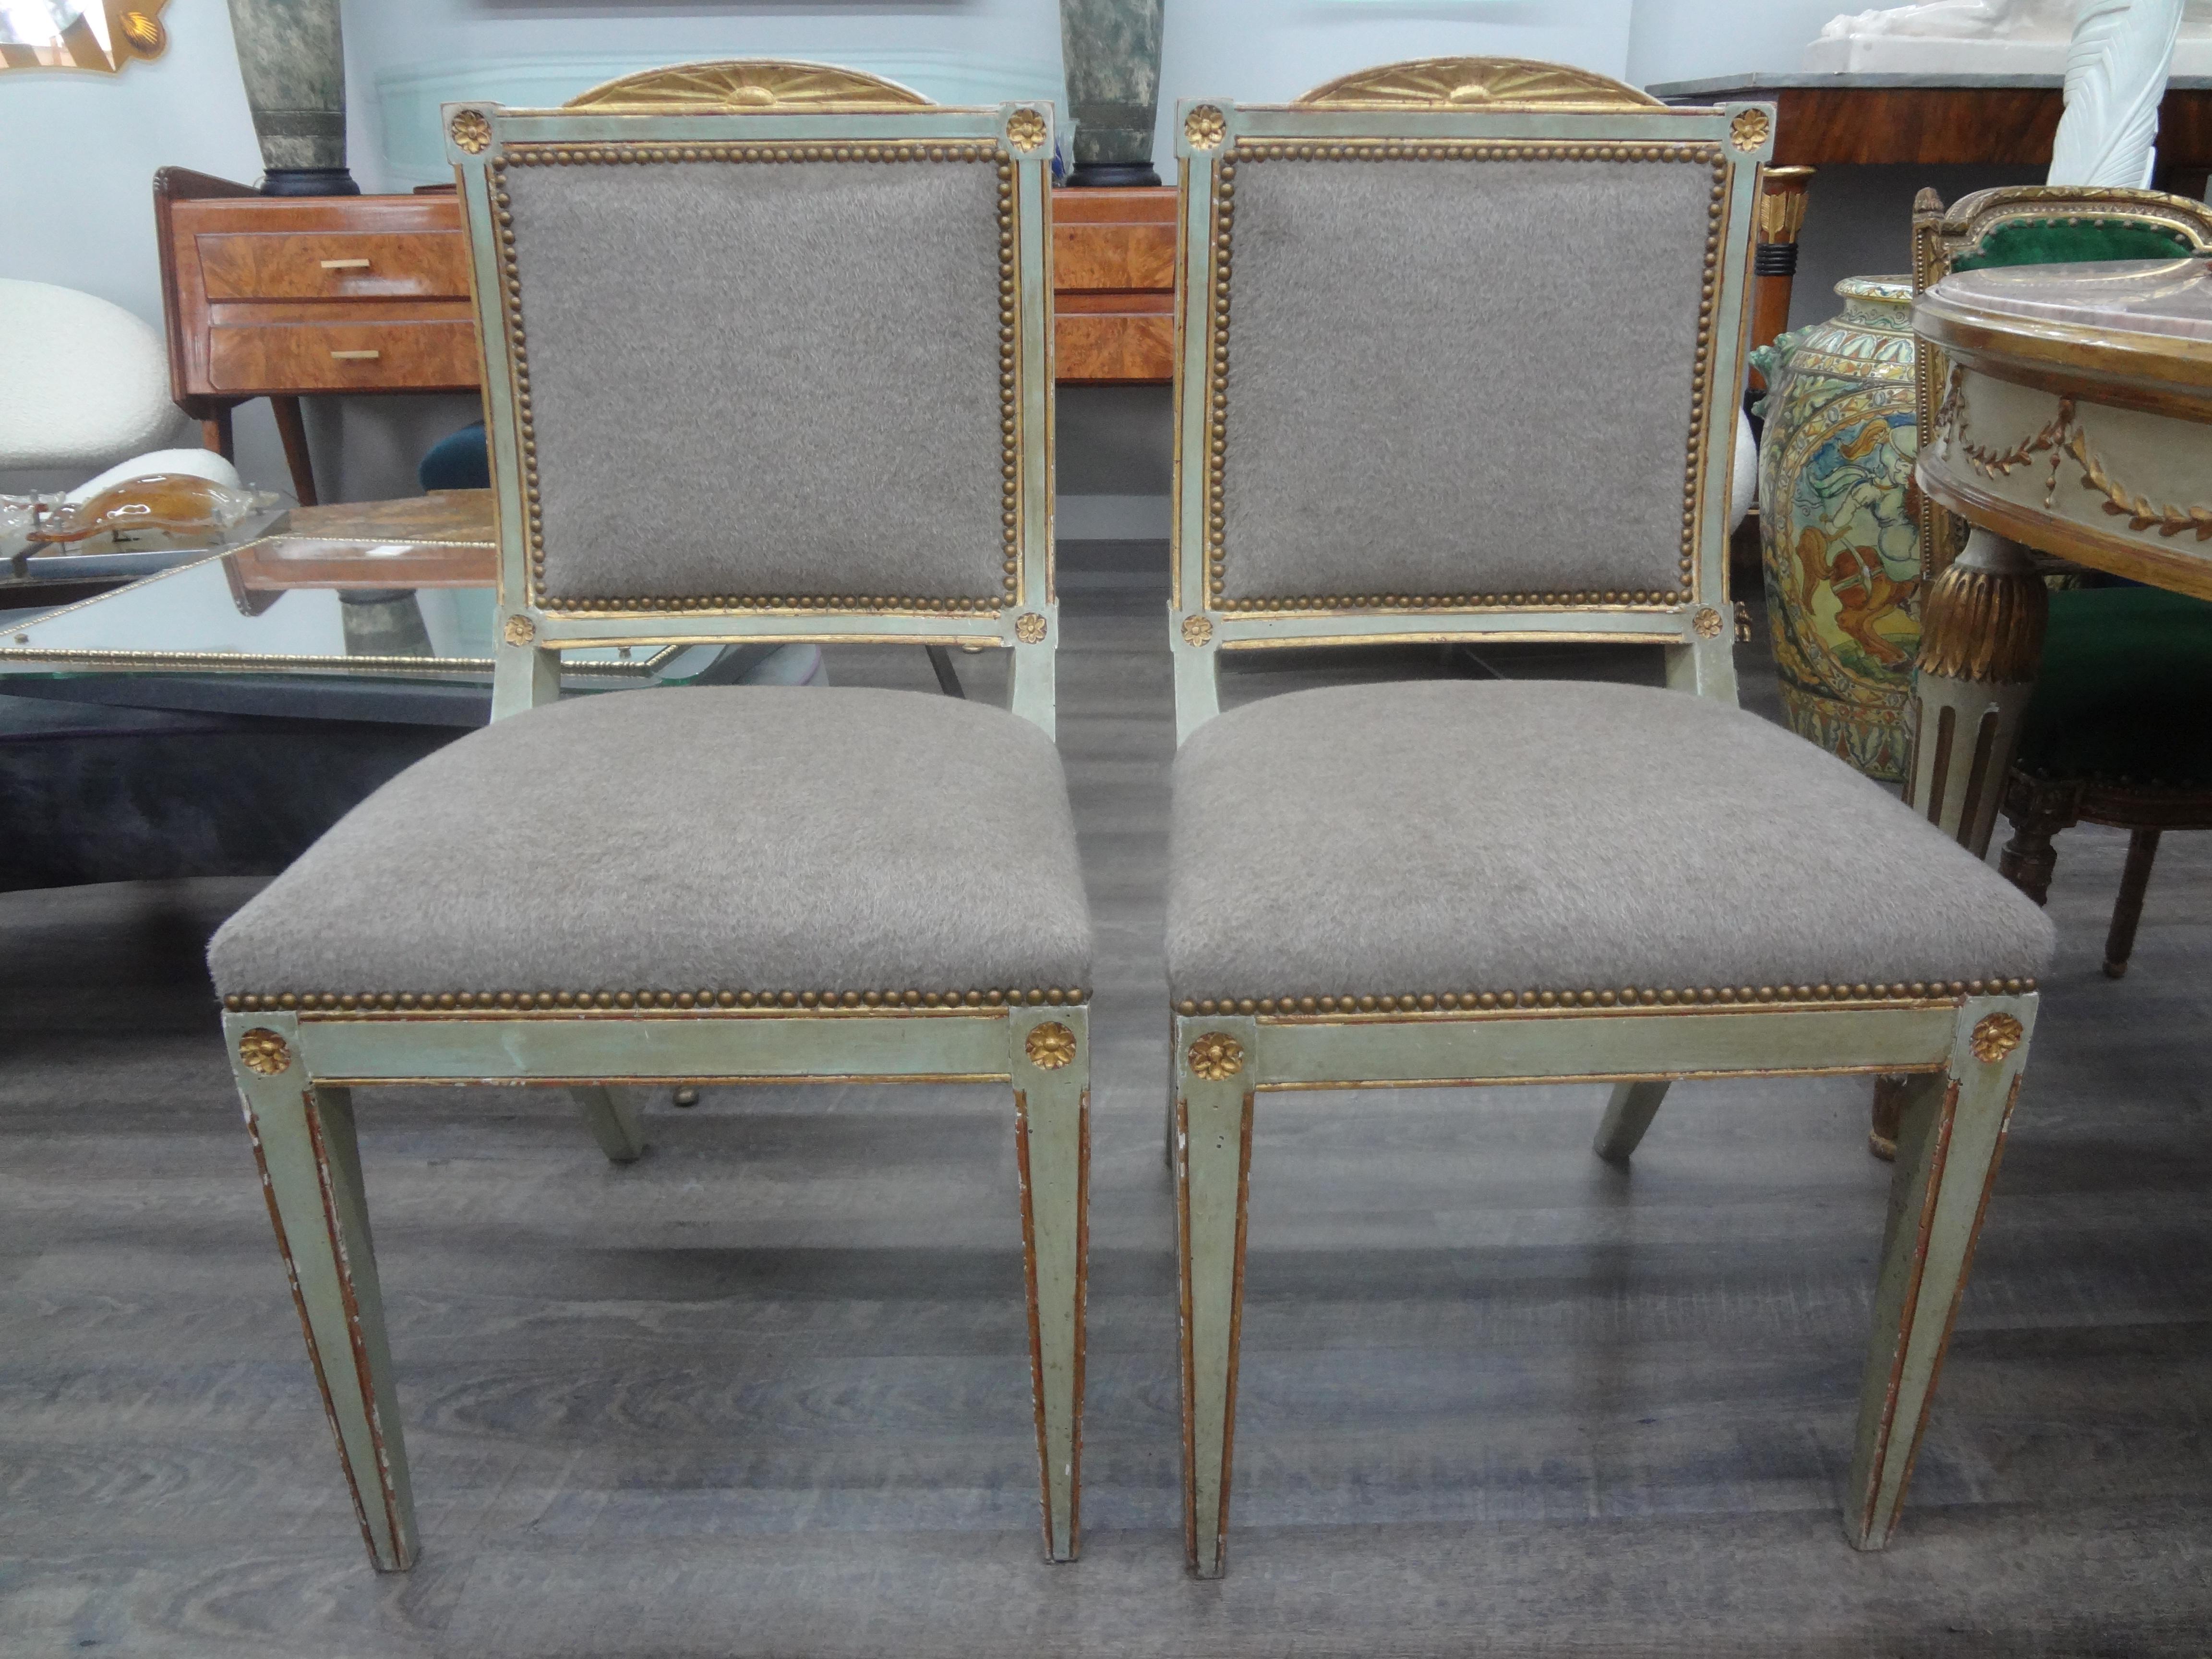 Pair of 18th century Italian Directoire painted and parcel gilt chairs.
This stunning pair of 18th century Italian Directoire chairs are painted a beautiful soft green accented with gilt and have Klismos legs. Our antique Italian side chairs,